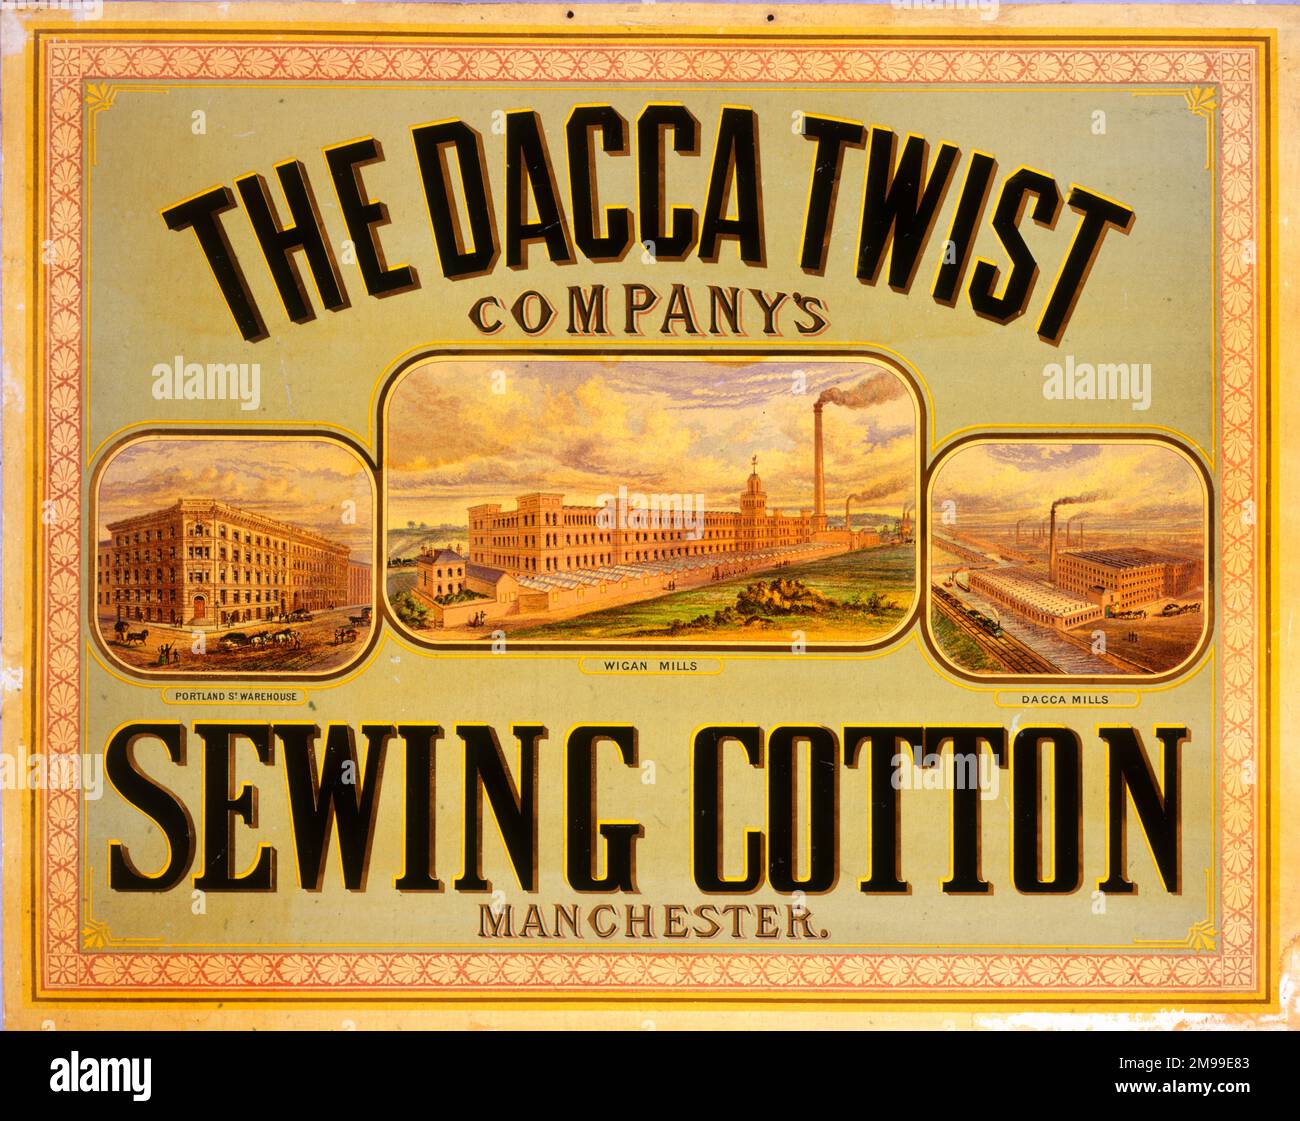 Advertising showcard, The Dacca Twist Company's Sewing Cotton, Manchester. Stock Photo